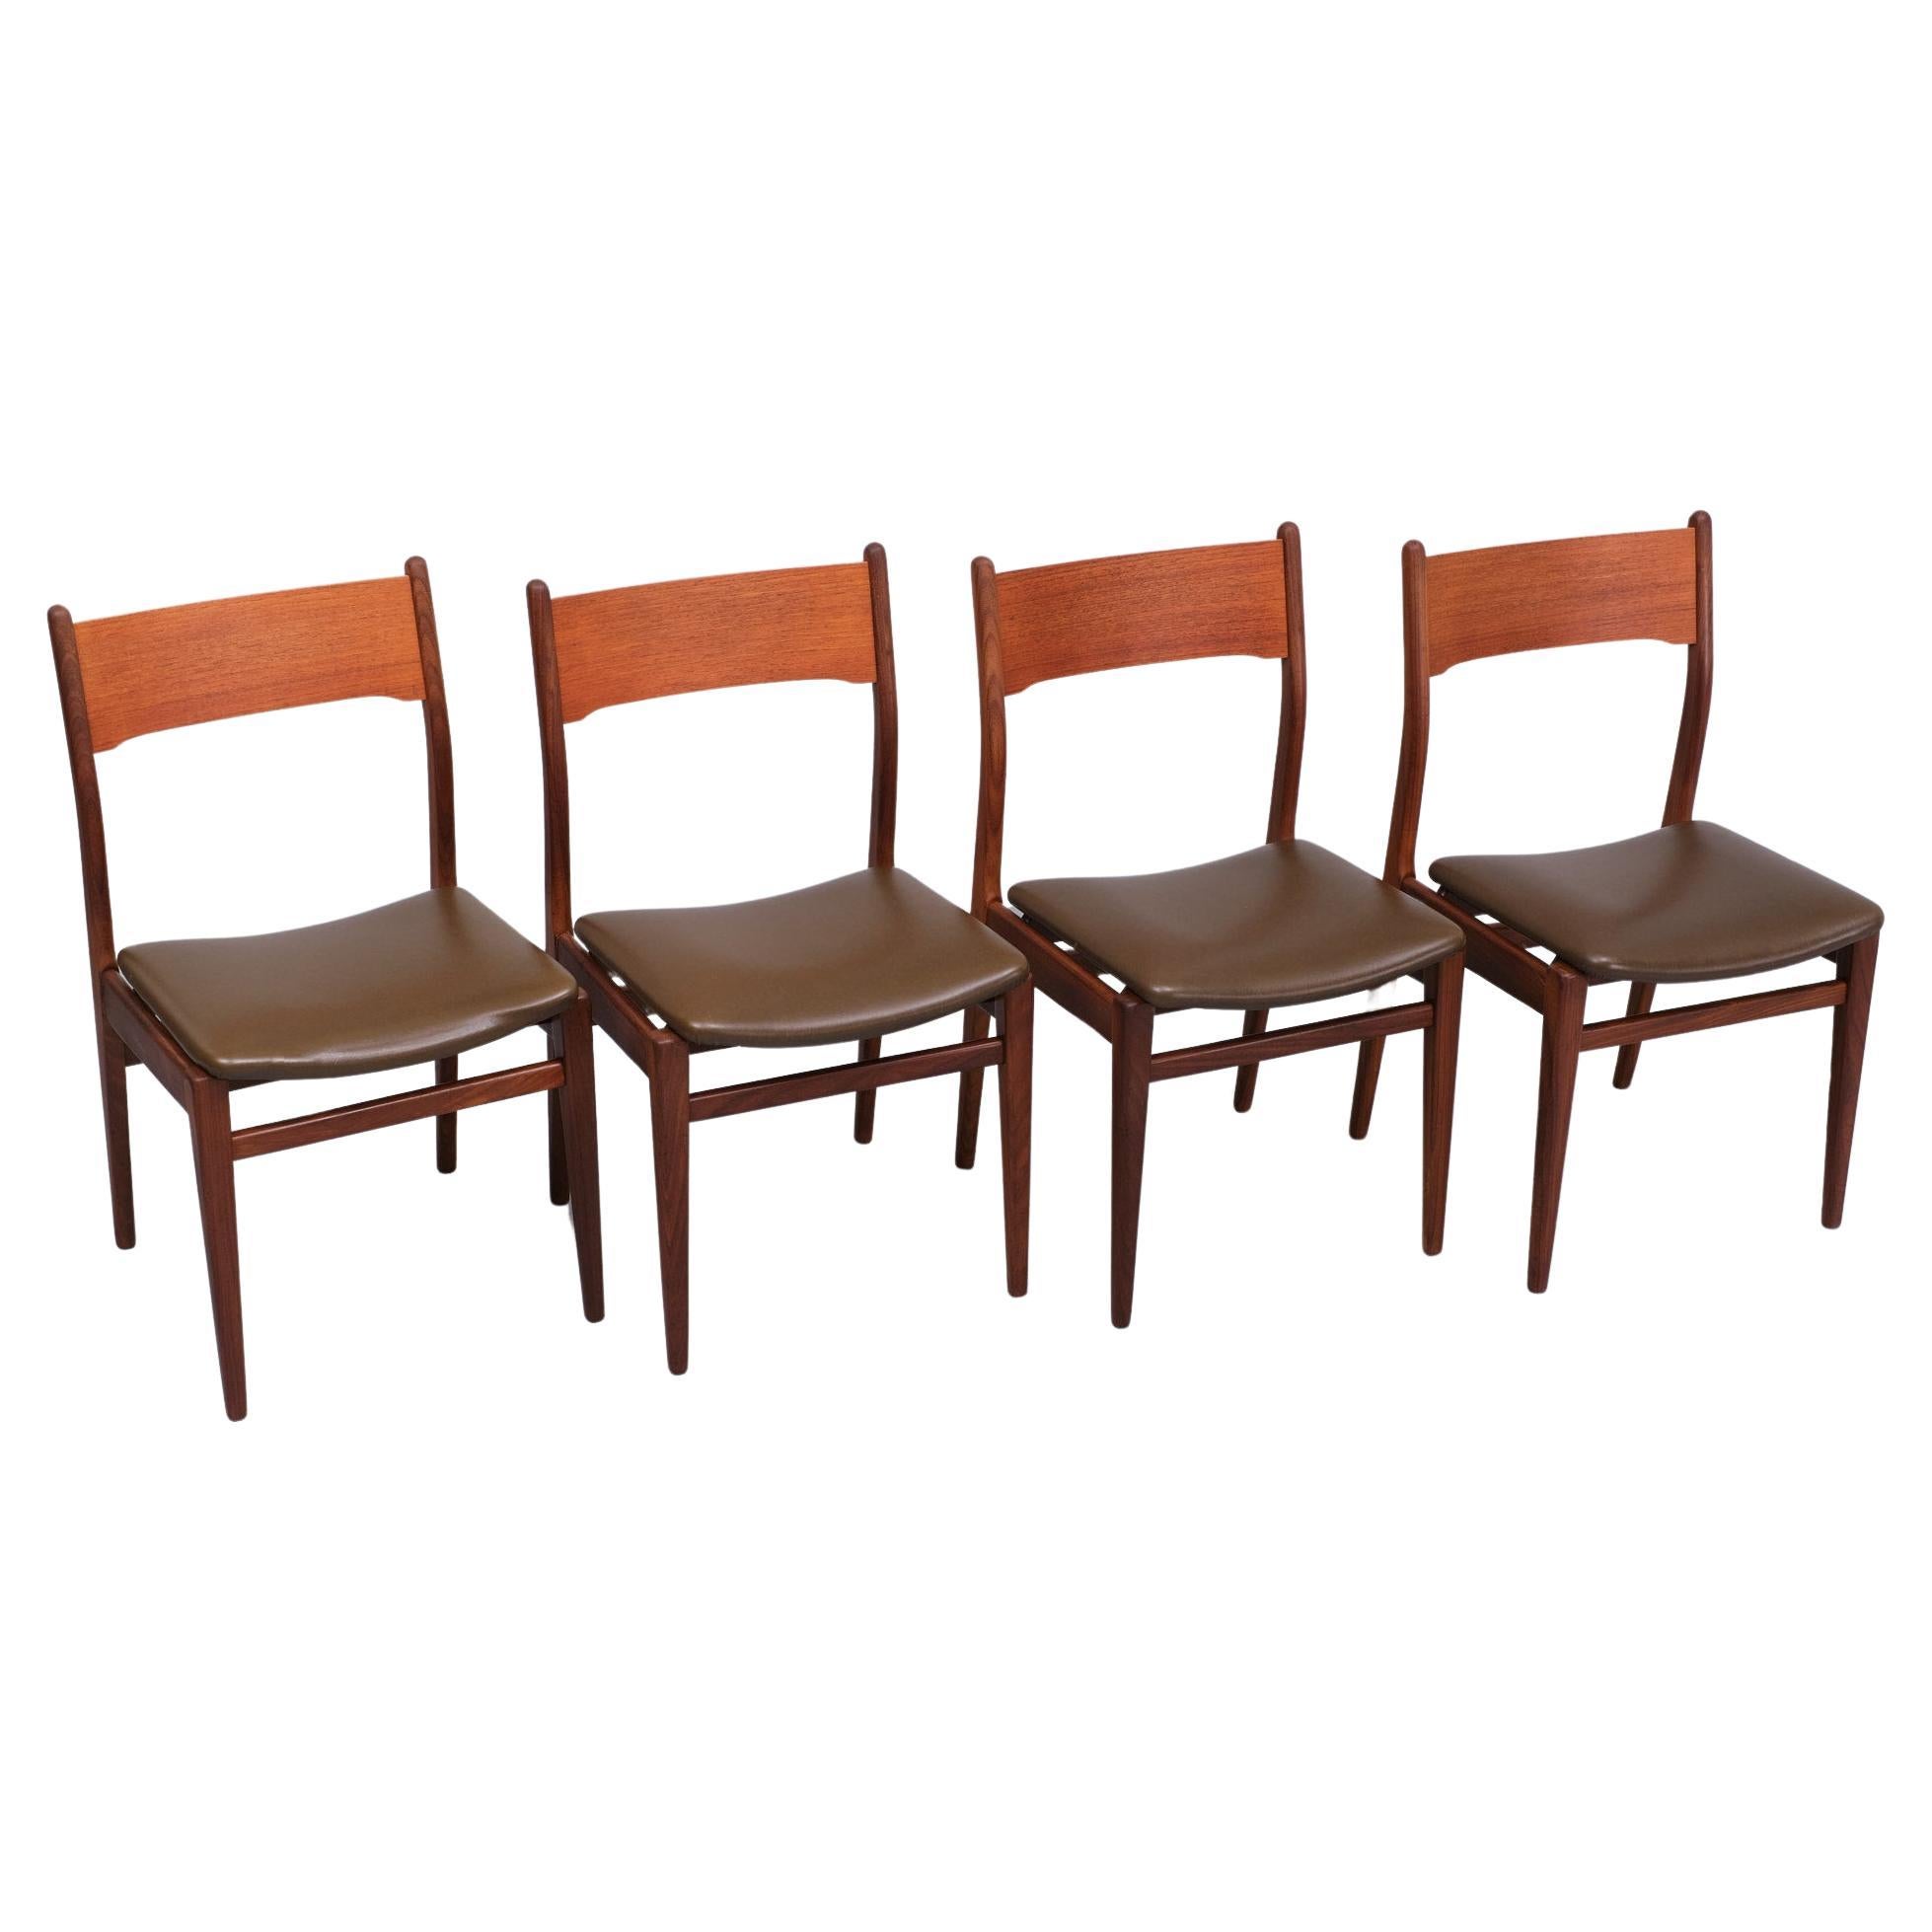 Very nice set of 4 Dining chairs . Solid Teak ,comes with a Brown Faux Leather 
upholstery .Beautiful organic shaped .1960s Holland  .Good condition .
Also for sale the Matching dining table , see photos .